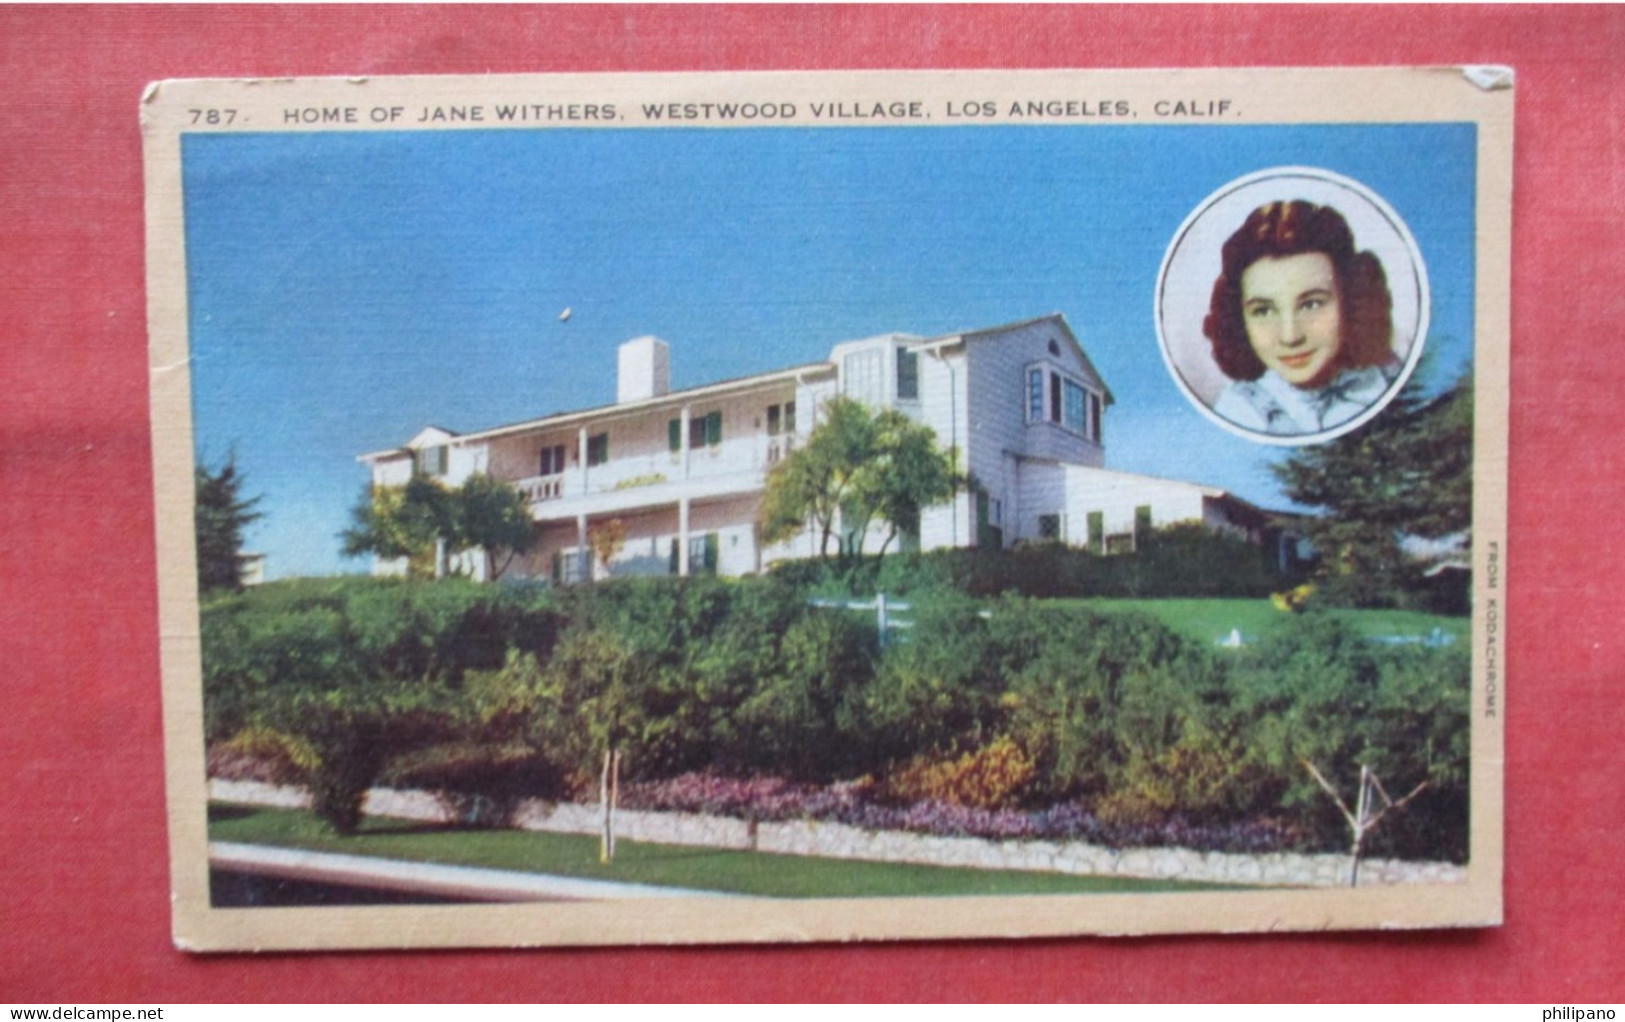 Home Of Jane Withers.   Los Angeles  - California        Ref 6355 - Los Angeles